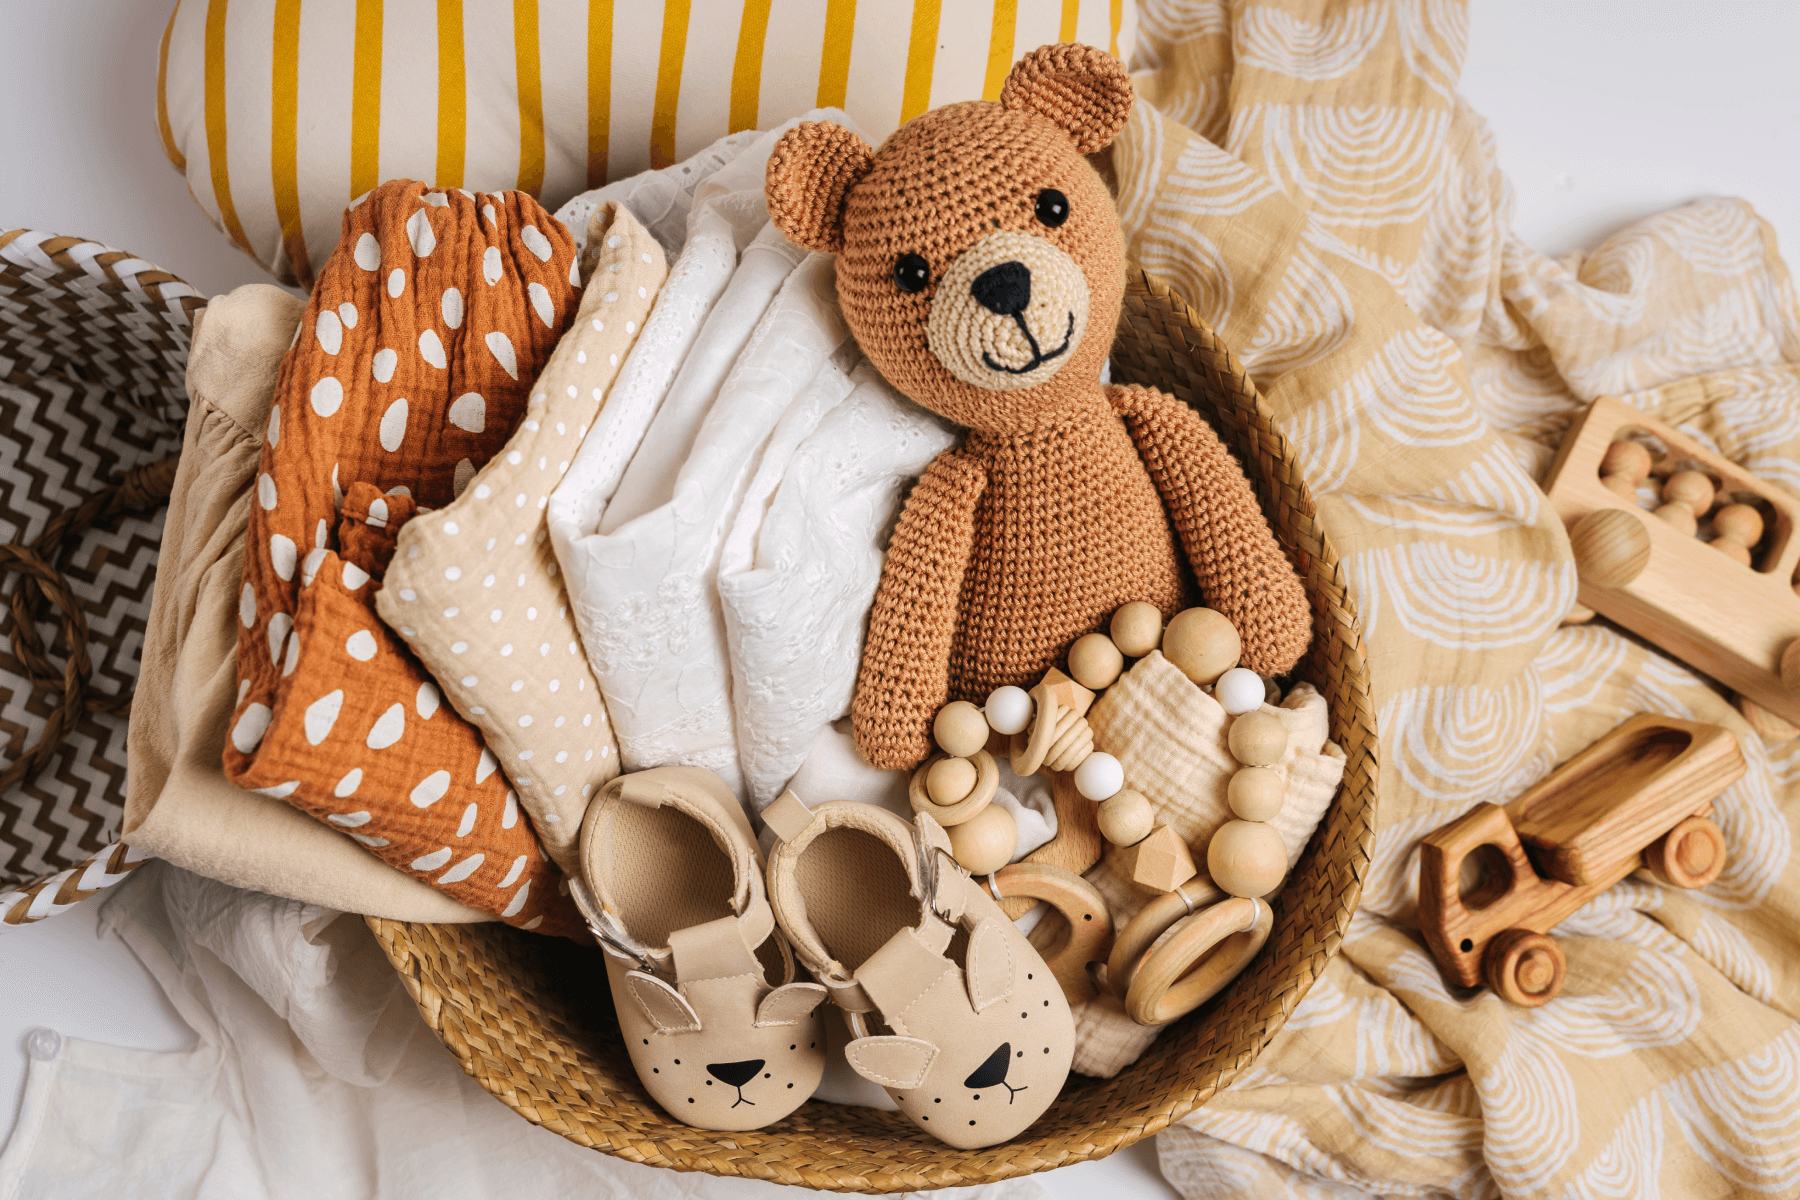 Winter Baby Registry Items You'll Use Again and Again